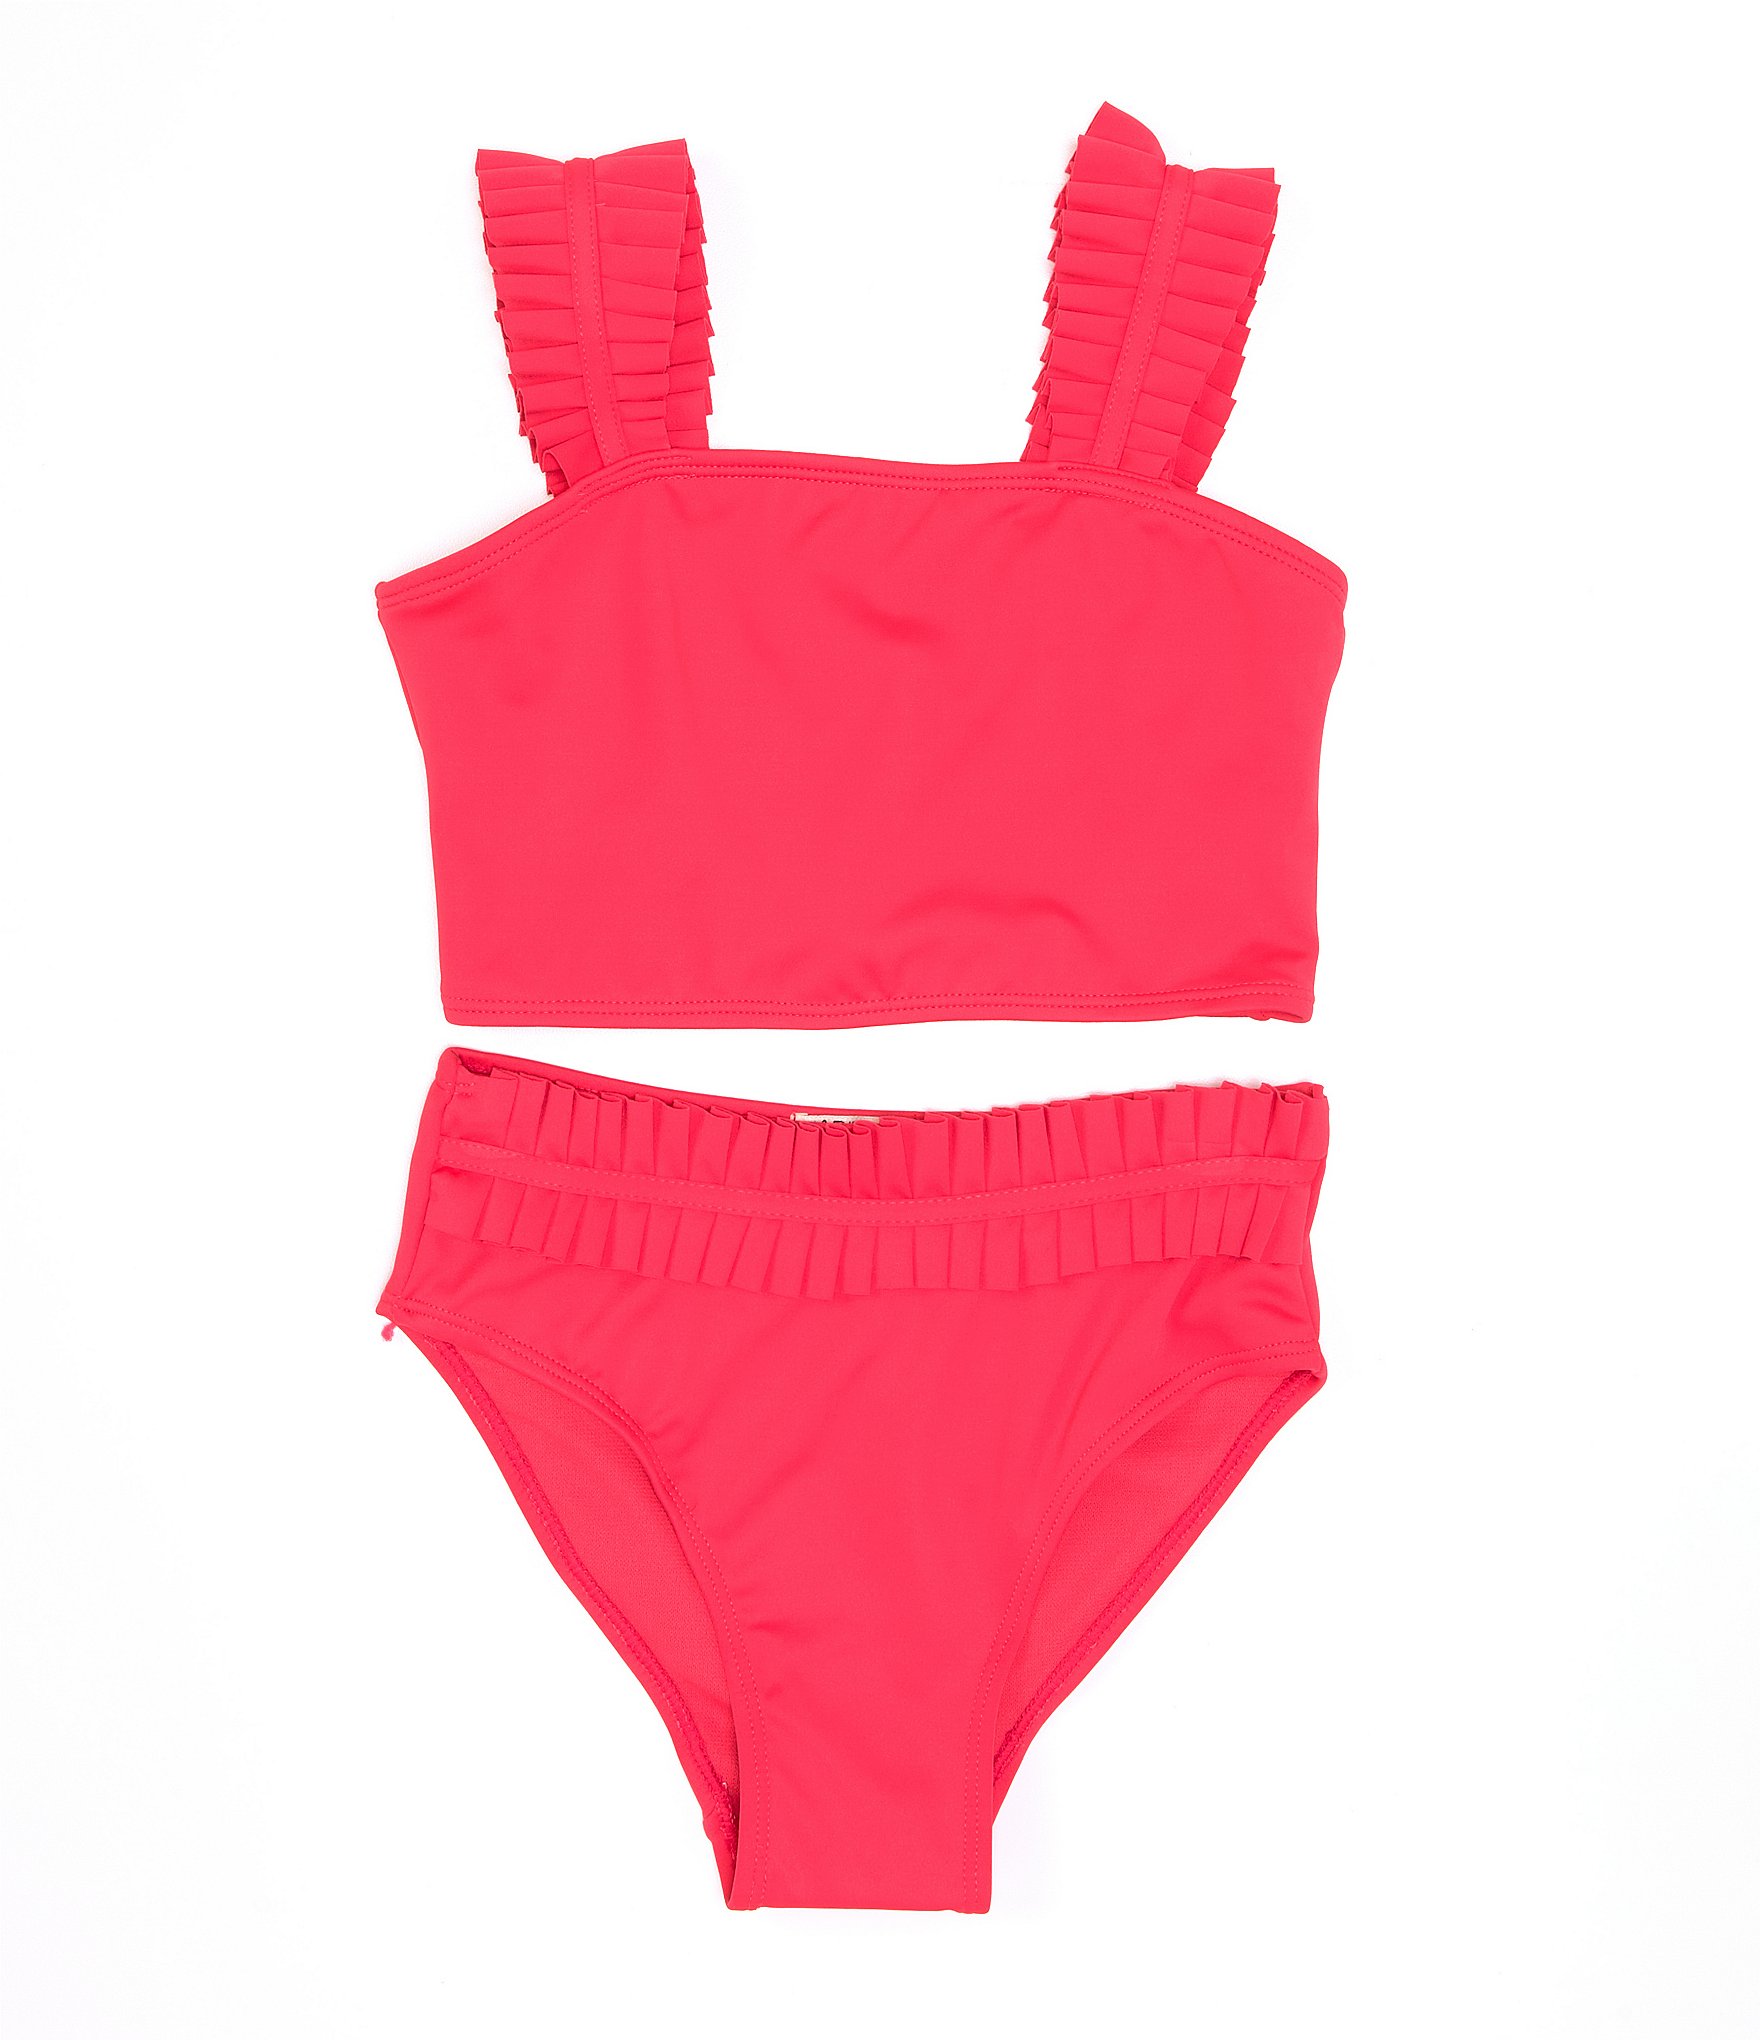 Habitual Pink Girls' Swimsuits & Cover-Ups for Tweens- Sizes 7-16 ...